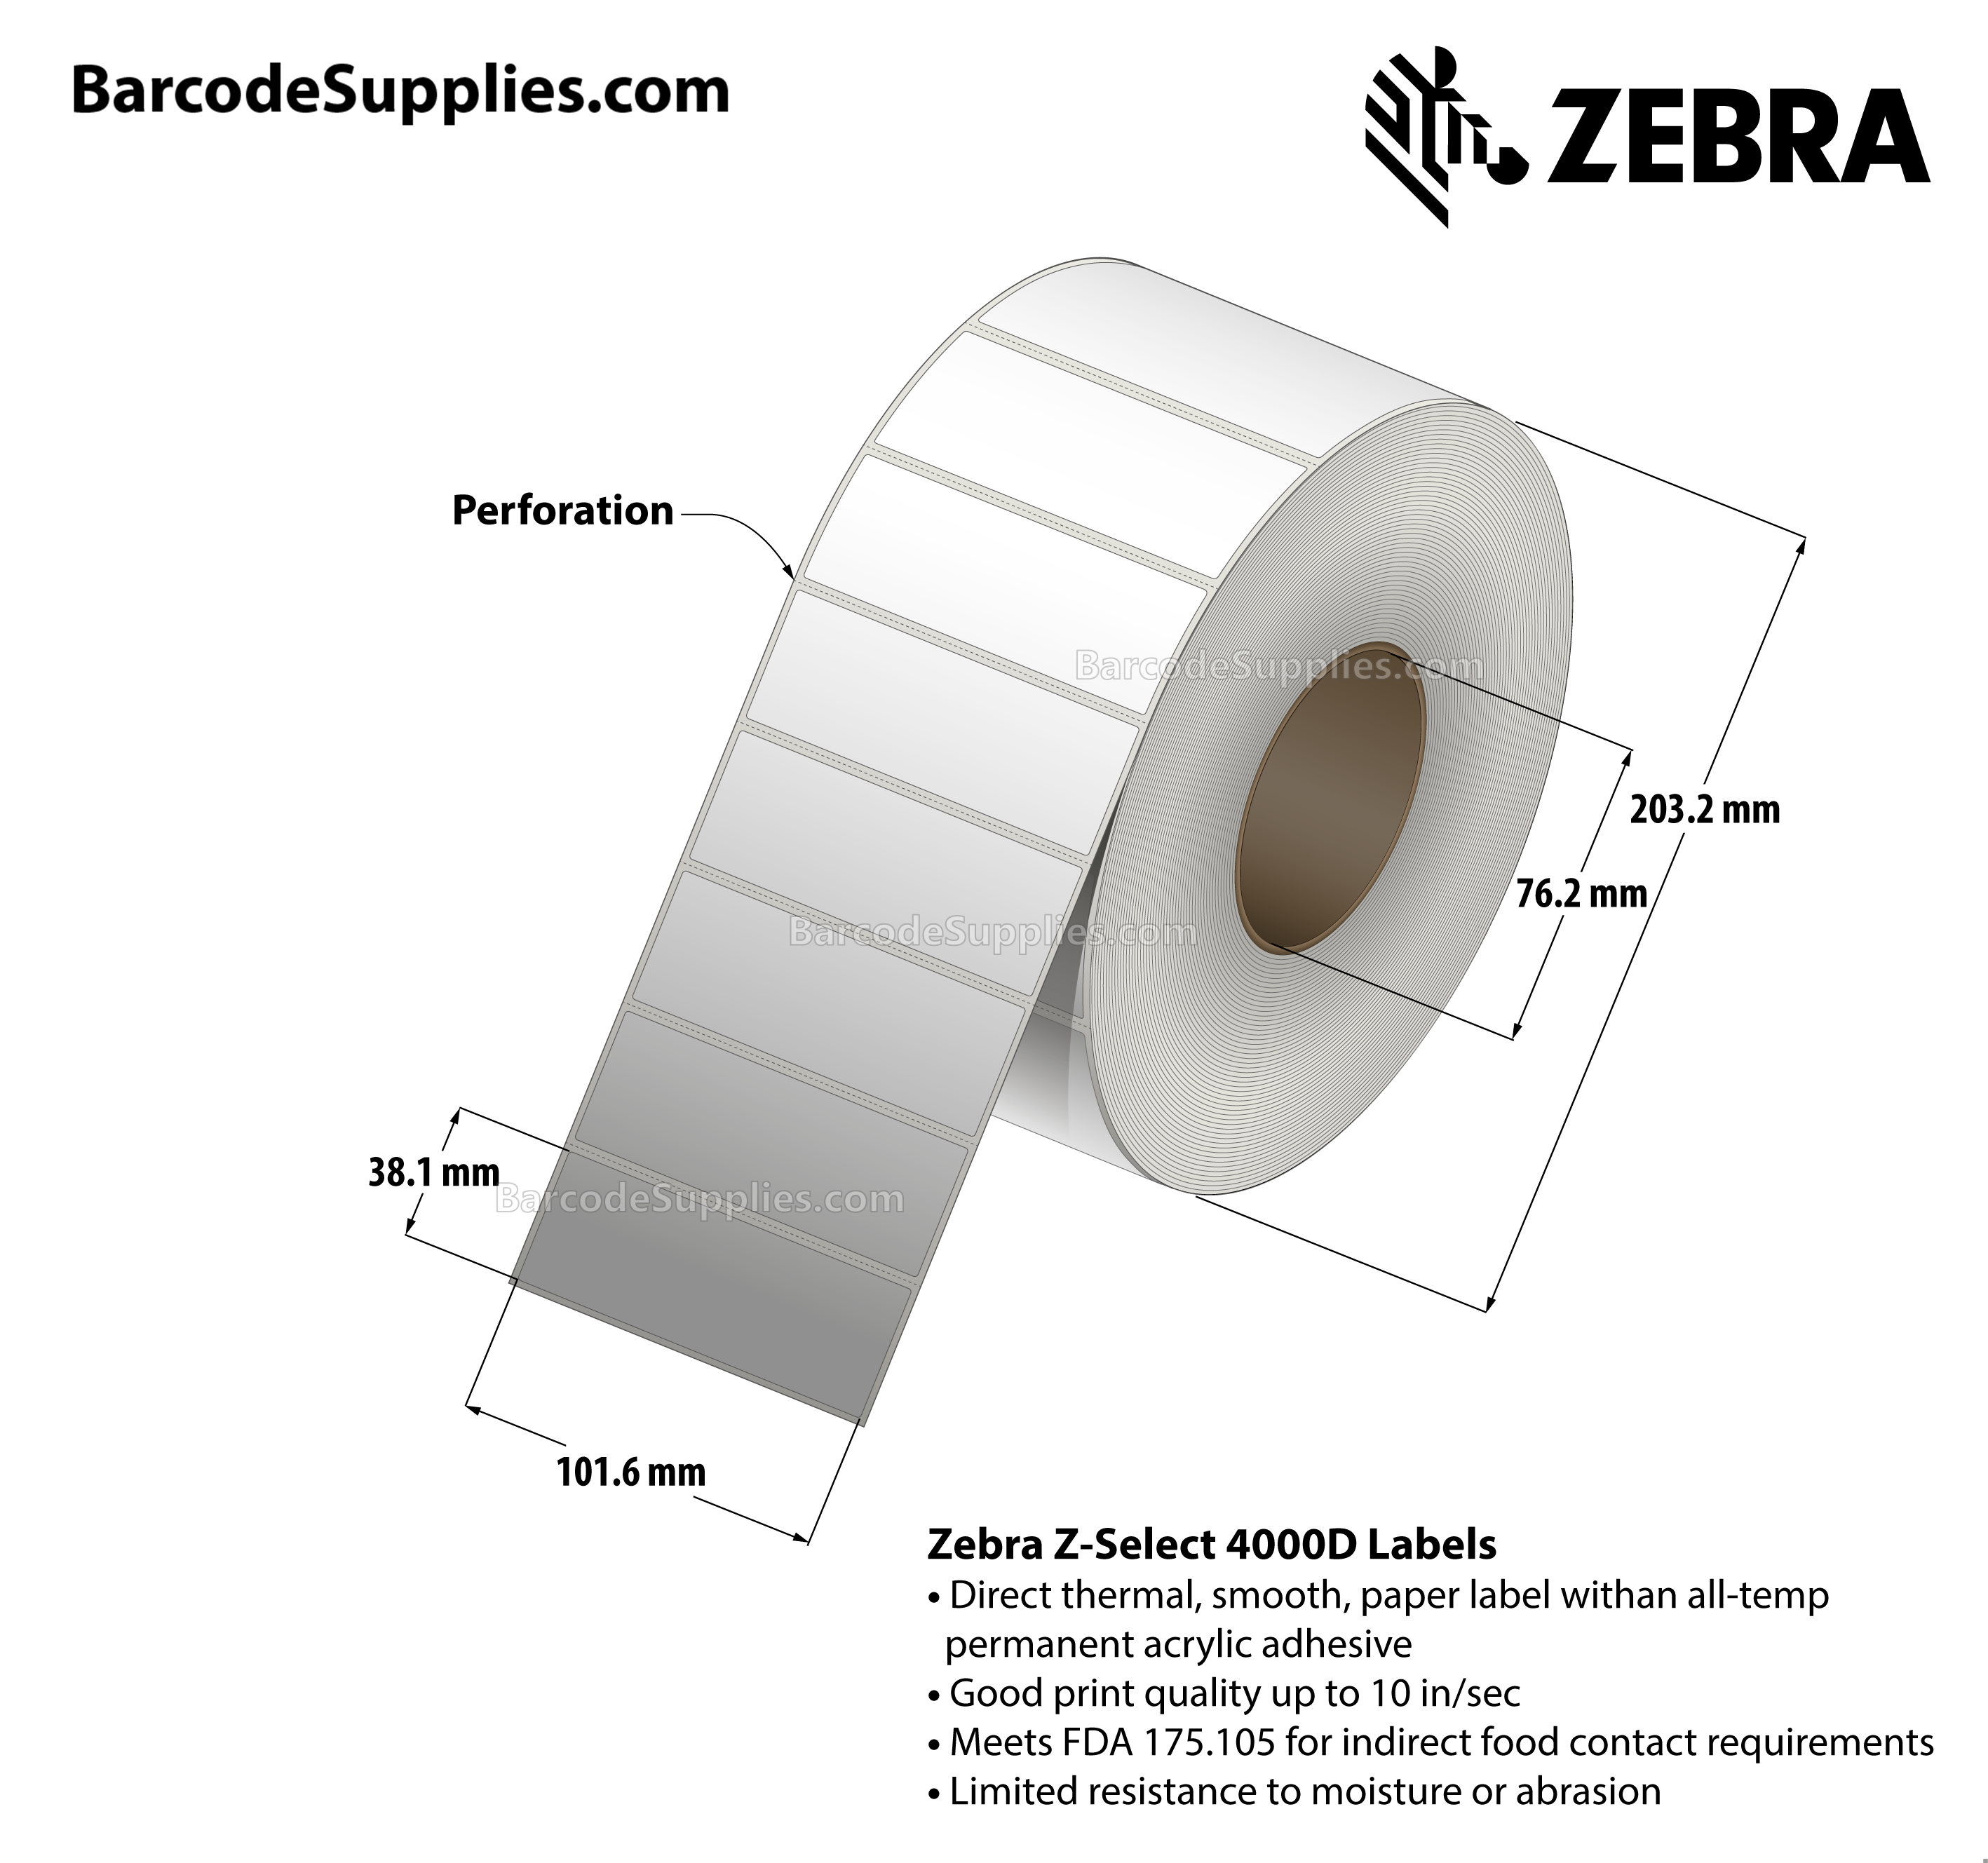 Products 4 x 1.5 Direct Thermal White Z-Select 4000D Labels With All-Temp Adhesive - Perforated - 4225 Labels Per Roll - Carton Of 4 Rolls - 16900 Labels Total - MPN: 10015348